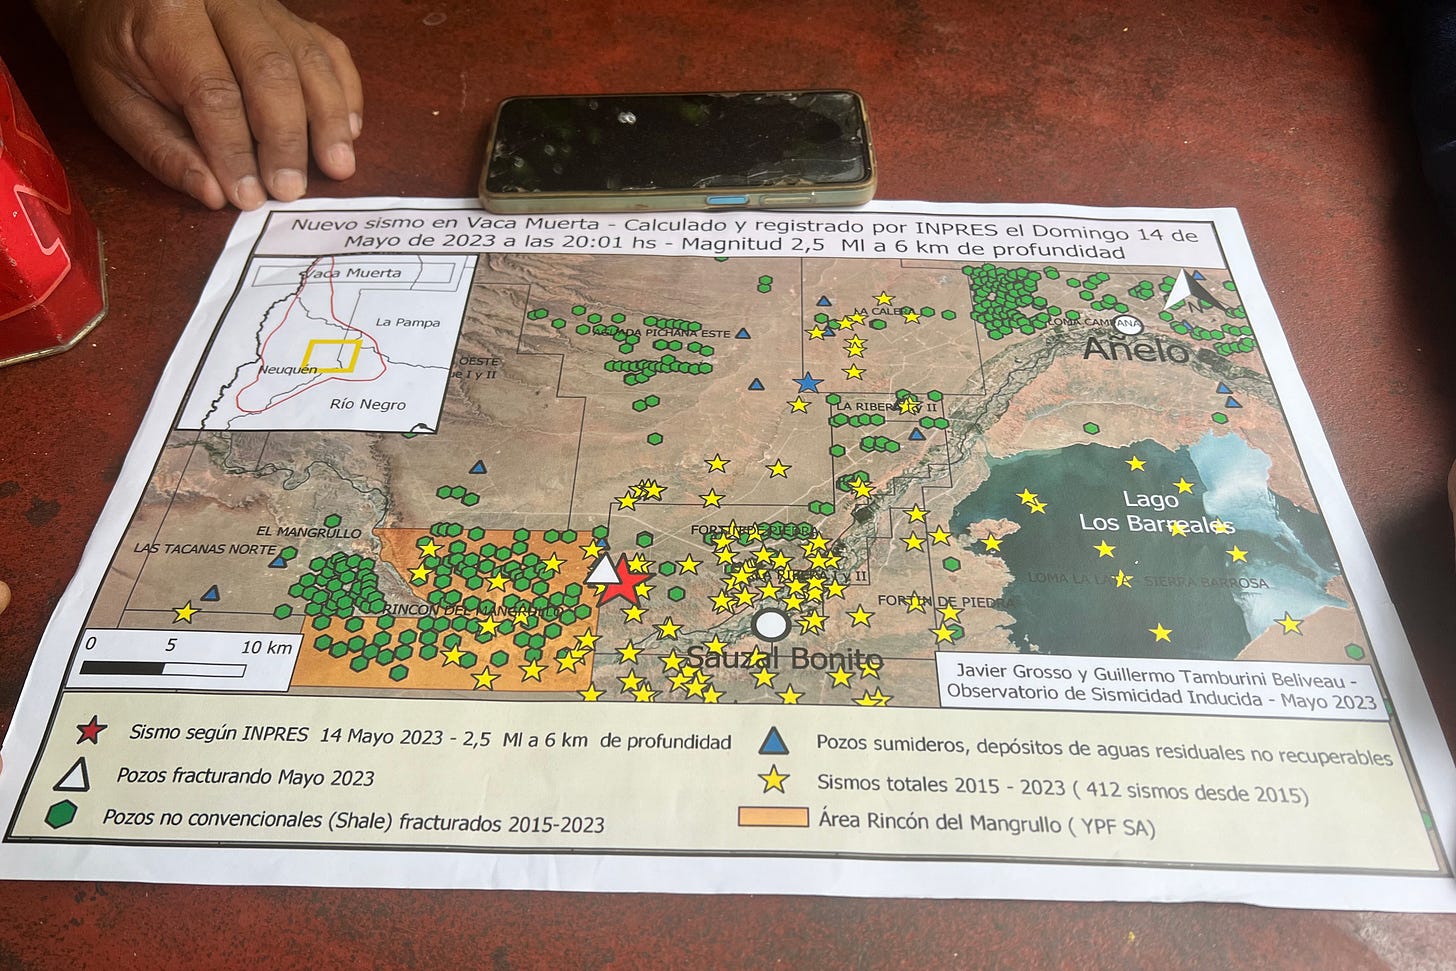 A map created by Javier Grosso depicting unconventional oil and gas operations and seismic activity in Vaca Muerta, a 30,000 square kilometer shale deposit. Credit: Katie Surma/Inside Climate News